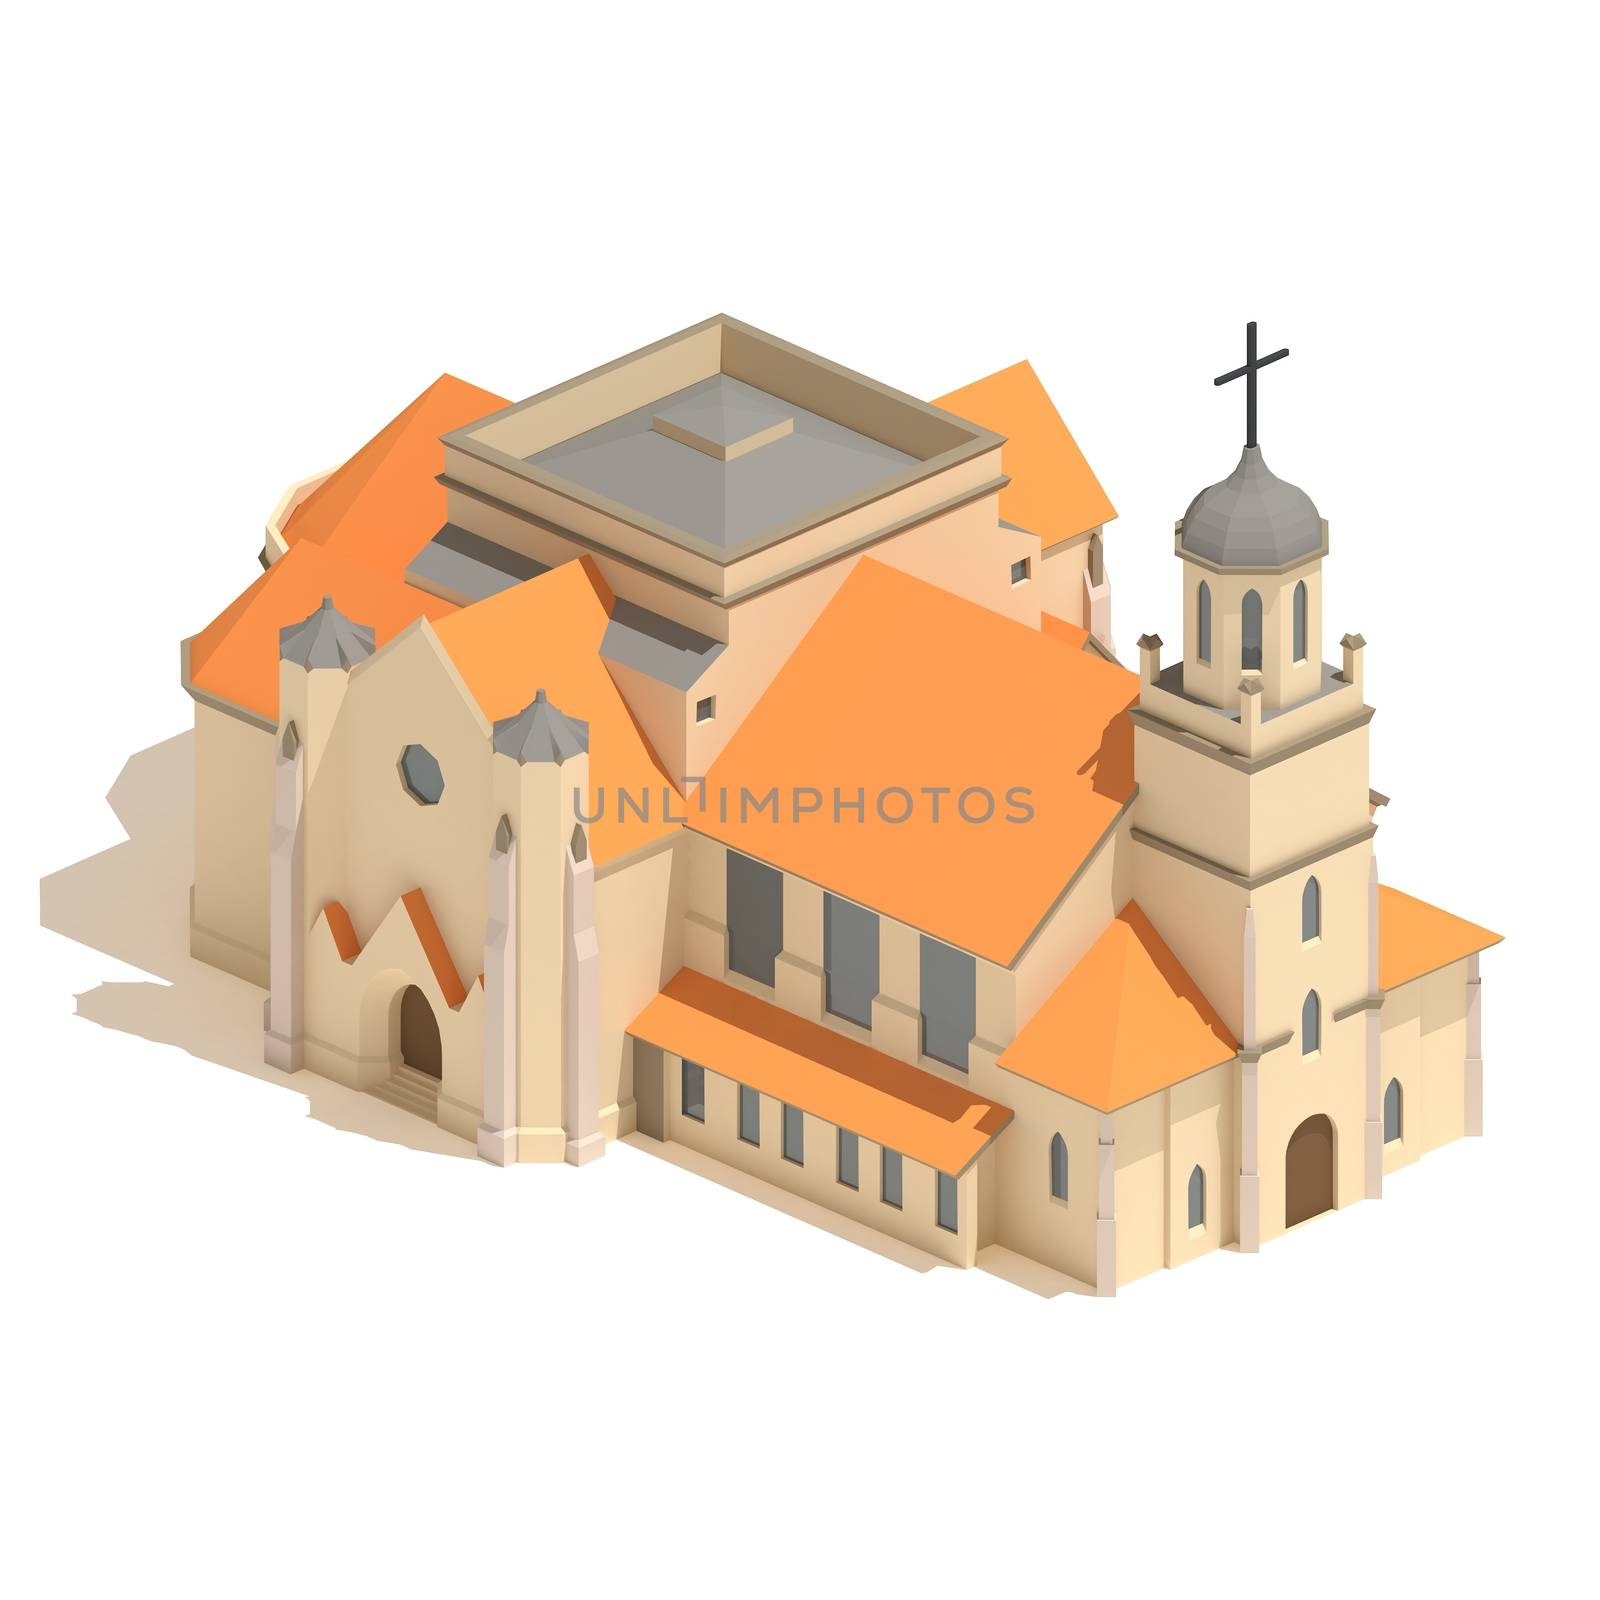 Flat 3d model isometric Christian church icon or cathedral building illustration isolated on white background